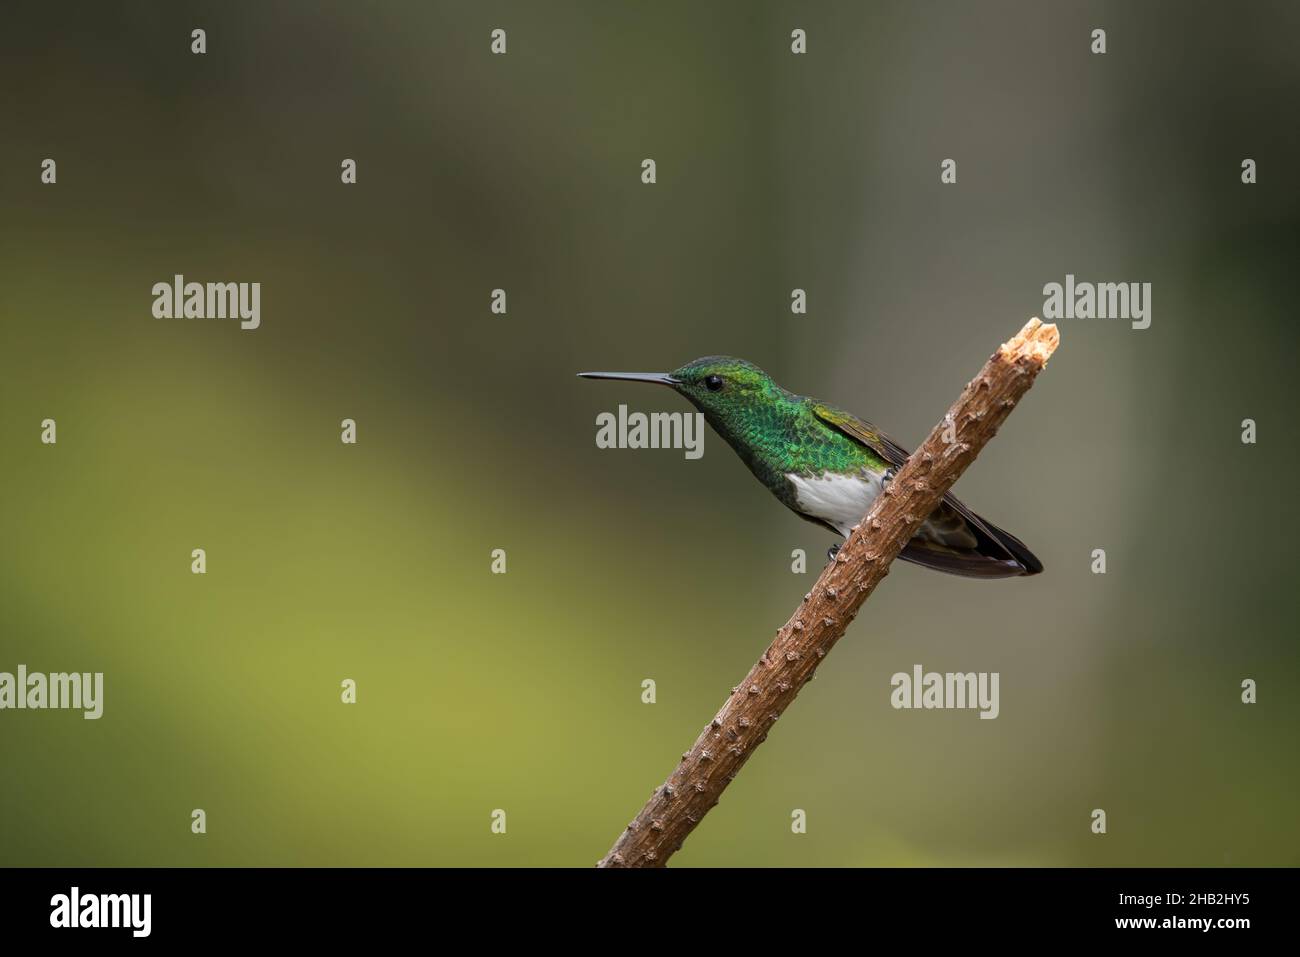 Sitting Snowy-bellied Hummingbird with blurry background Stock Photo